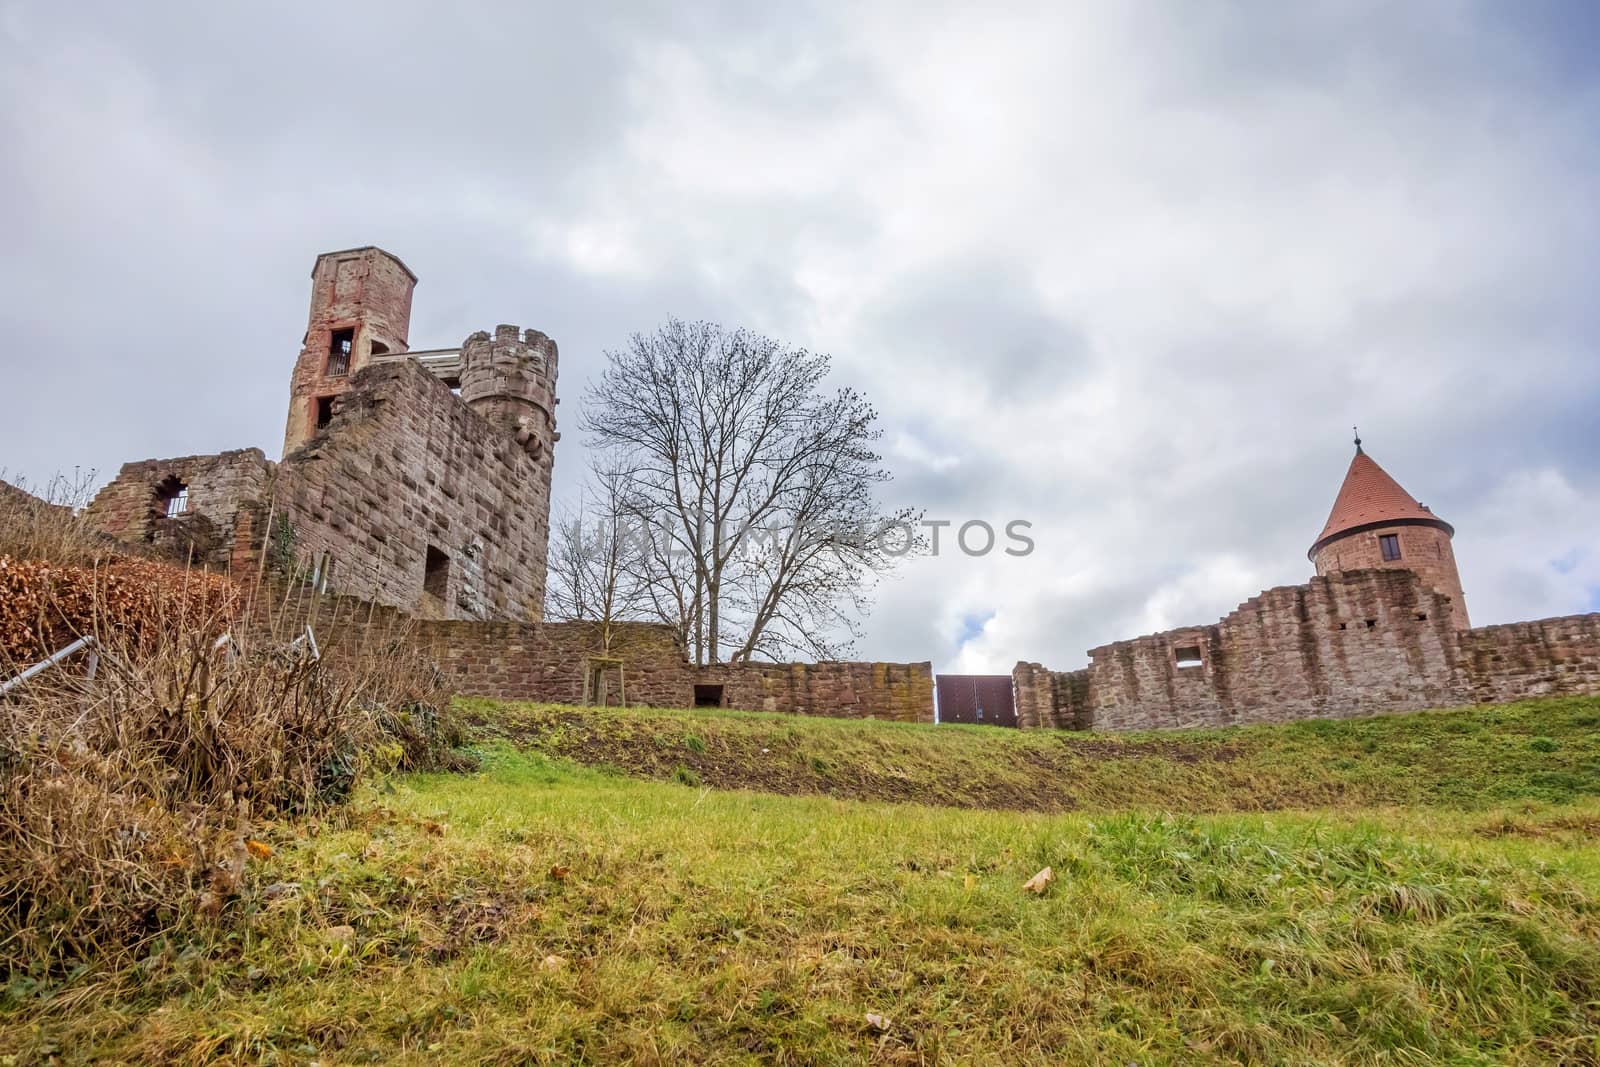 Fortress named Bergfeste Dilsberg - ruins on a hilltop overlooking the Neckar valley